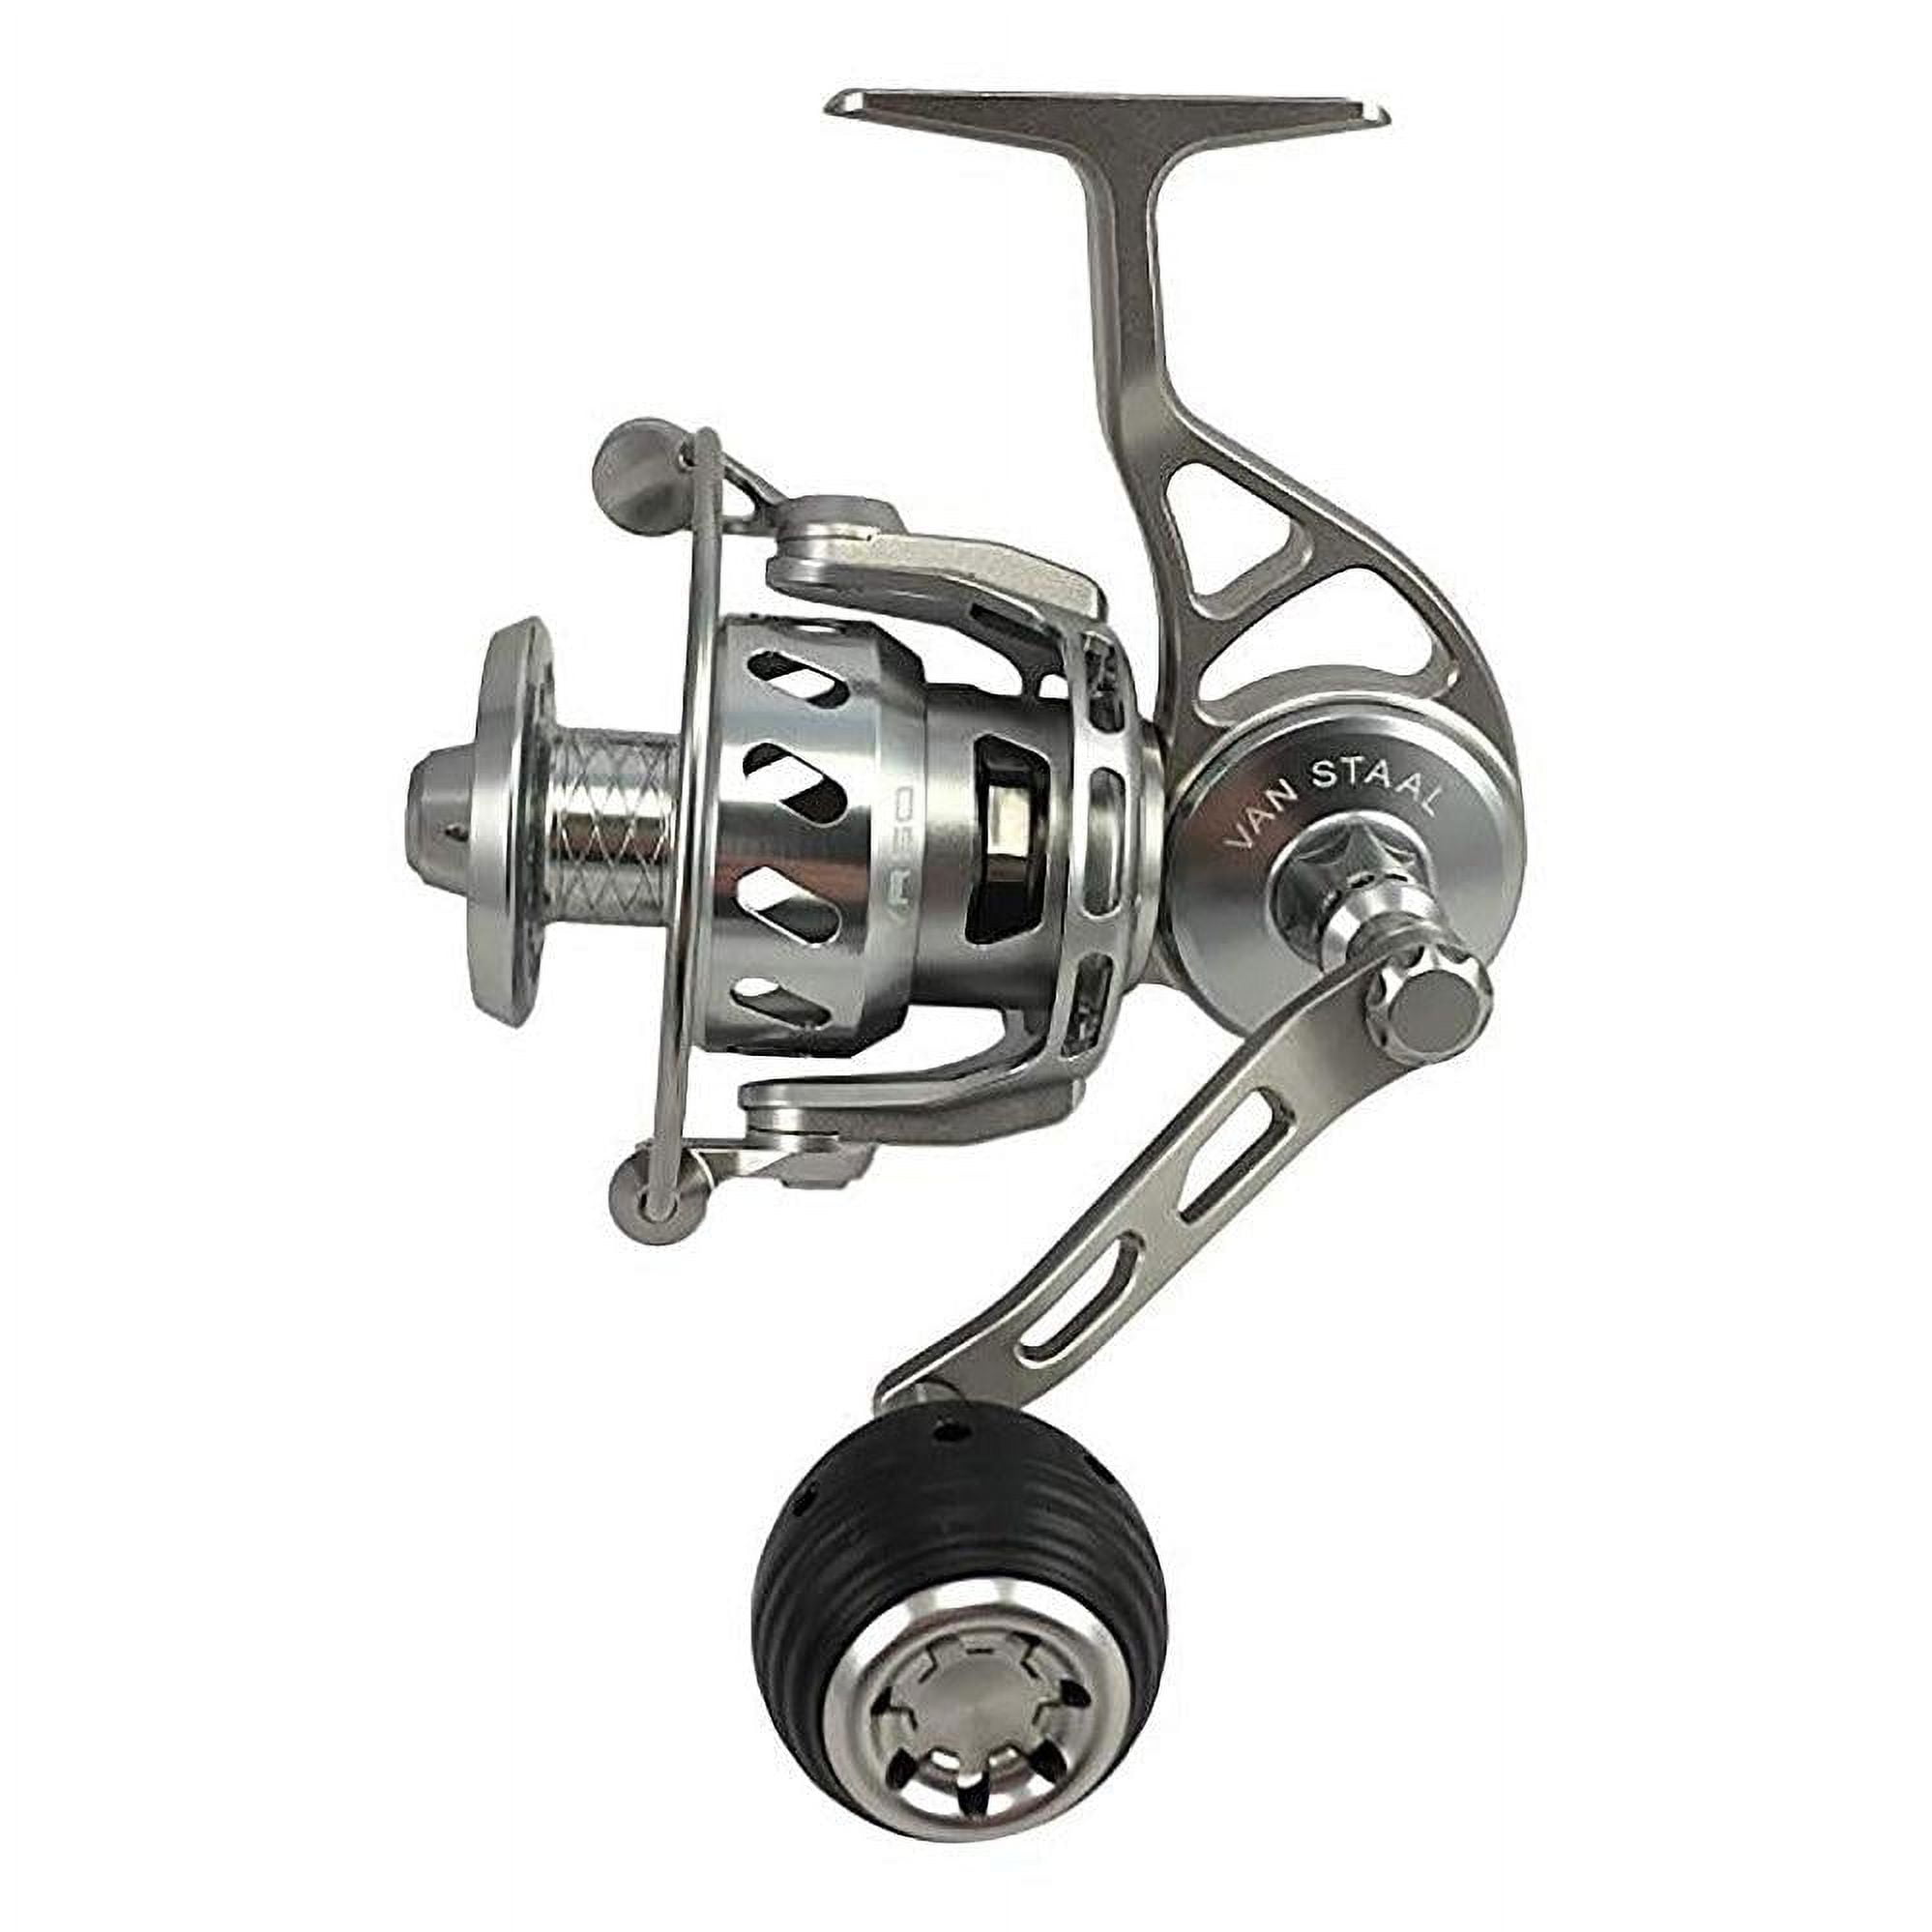 Van Staal VR Spin 150 - Silver Spinning Reel 